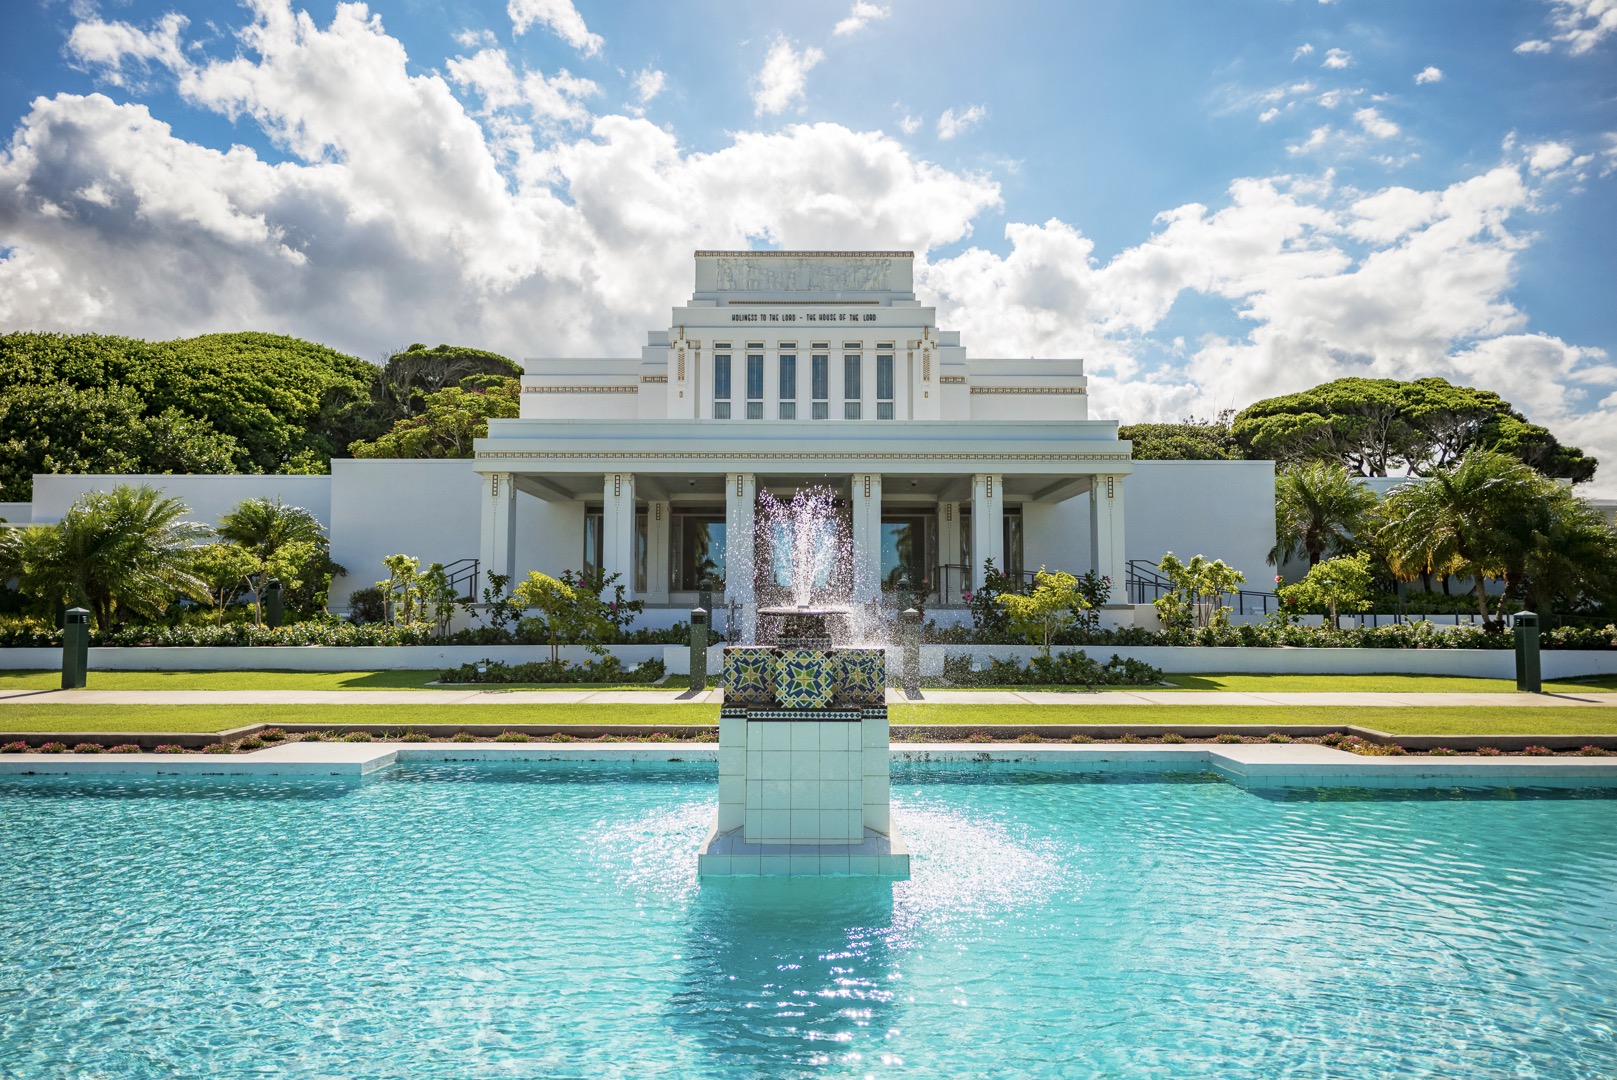 A Refreshing Location For Devout Believers - Laie Hawaii Temple - Circle Adventure